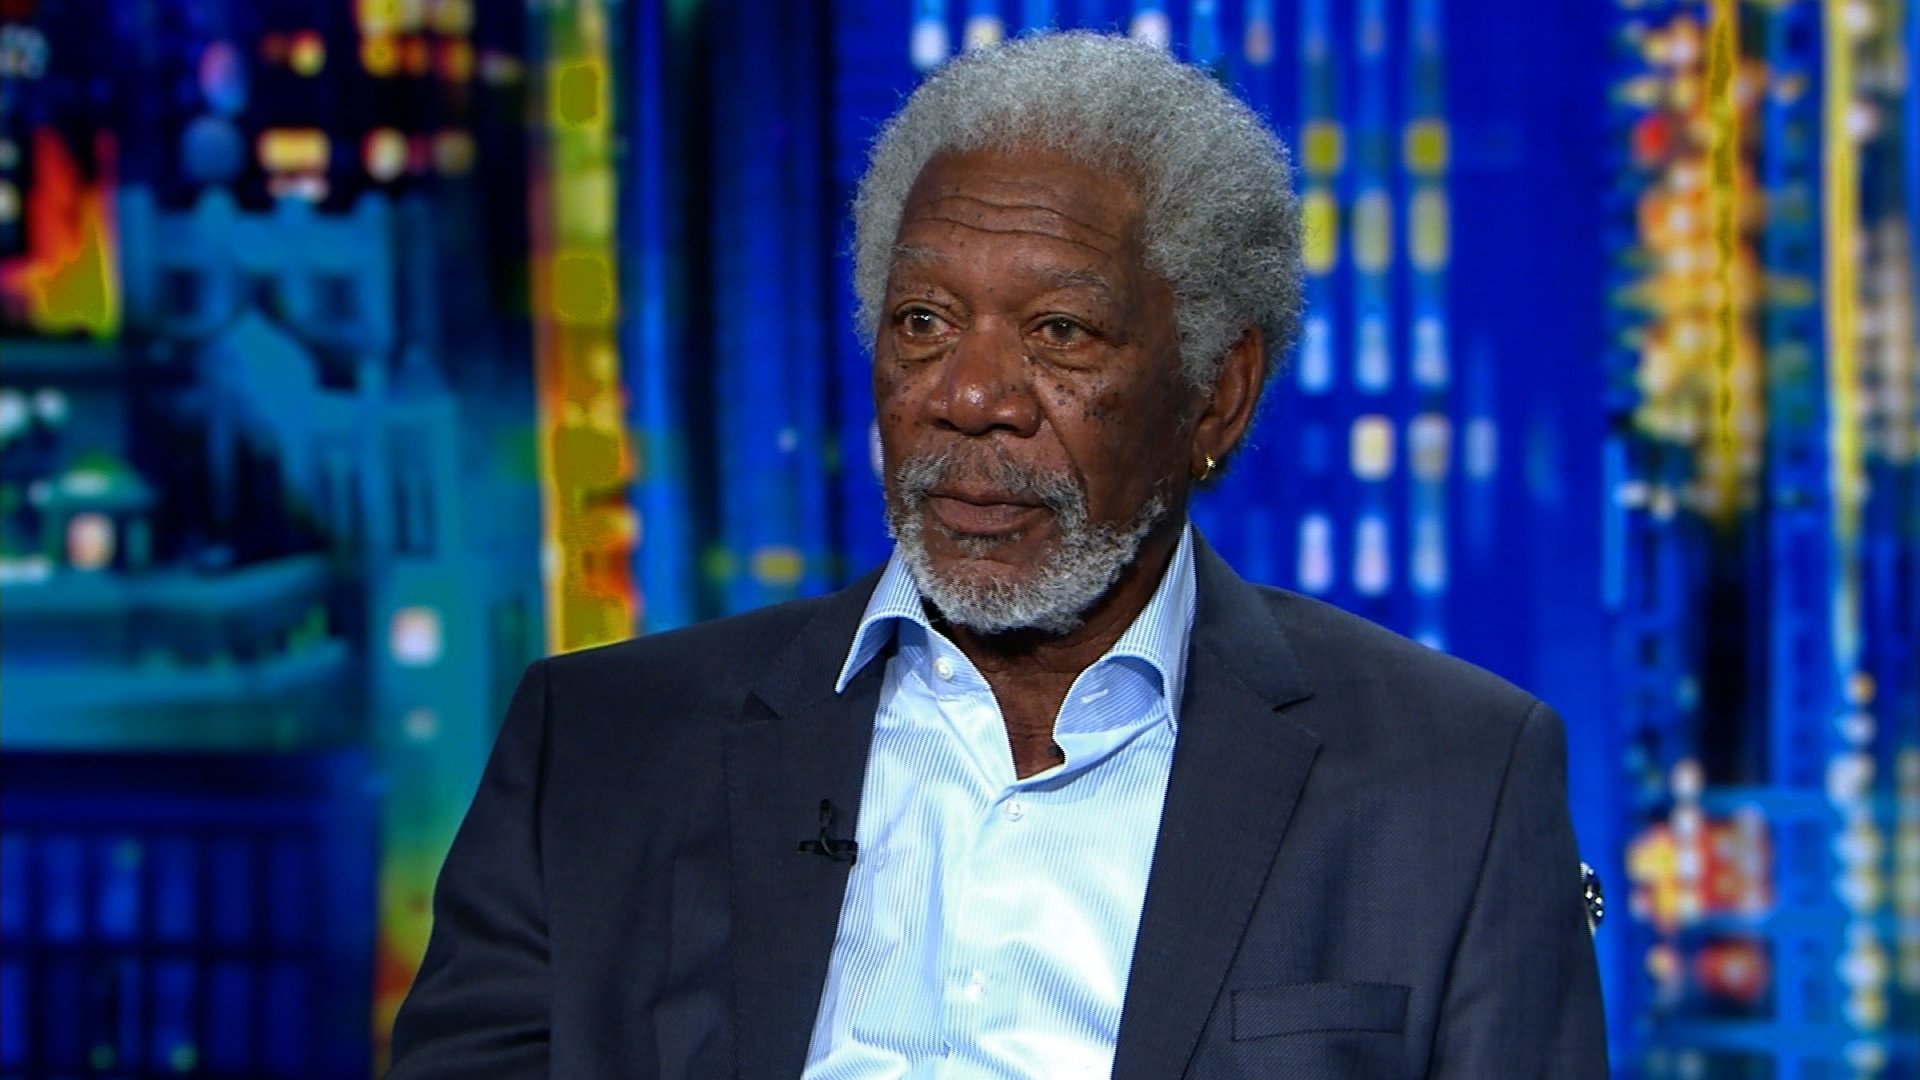 A private plane carrying actor Morgan Freeman made a "forced landing" after its tires blew out while en route to Houston.
No one was injured.